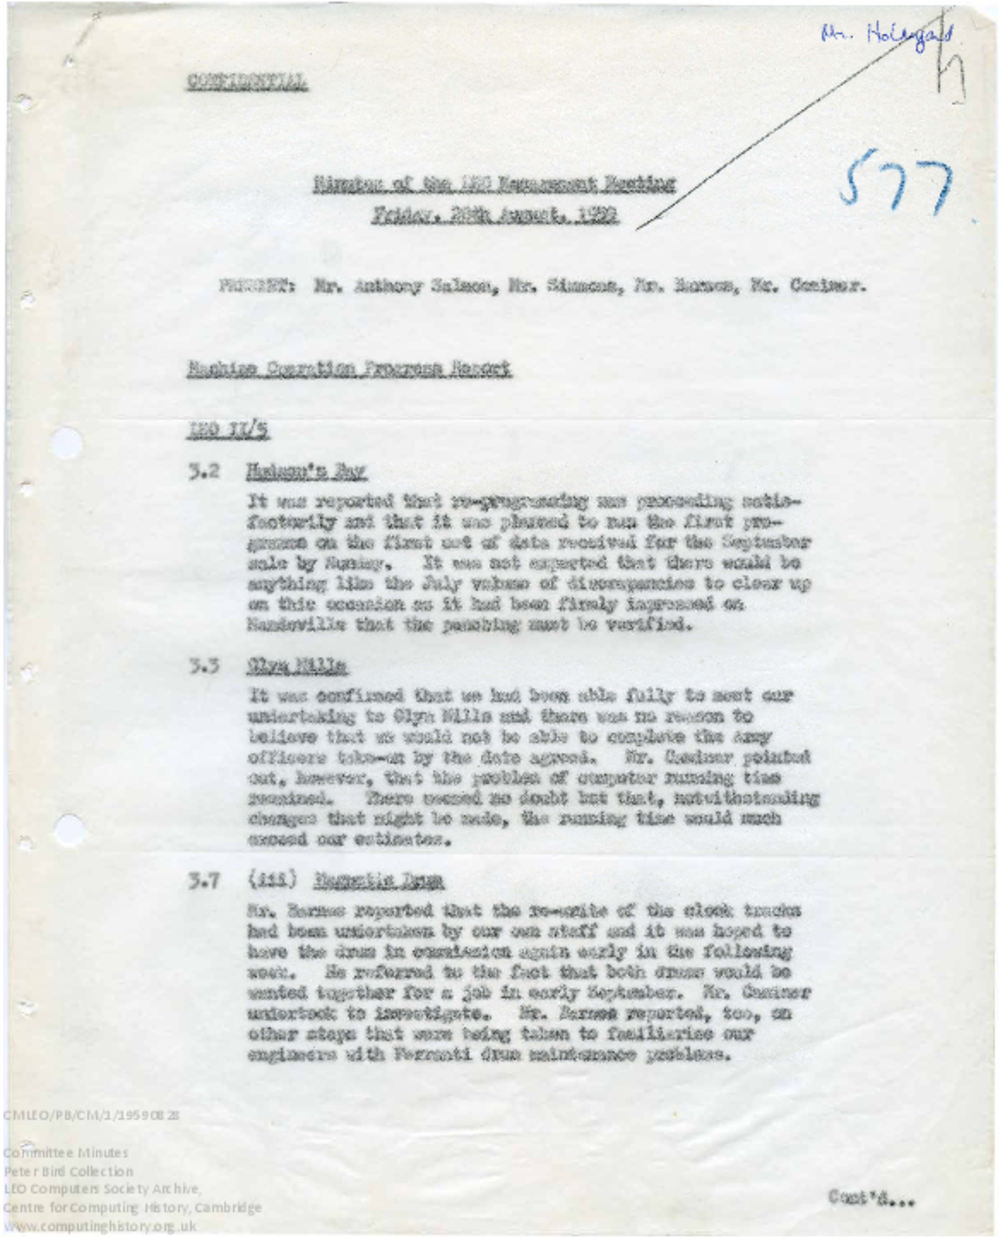 Article: 56041 LEO Management Meeting, 28/8/1959